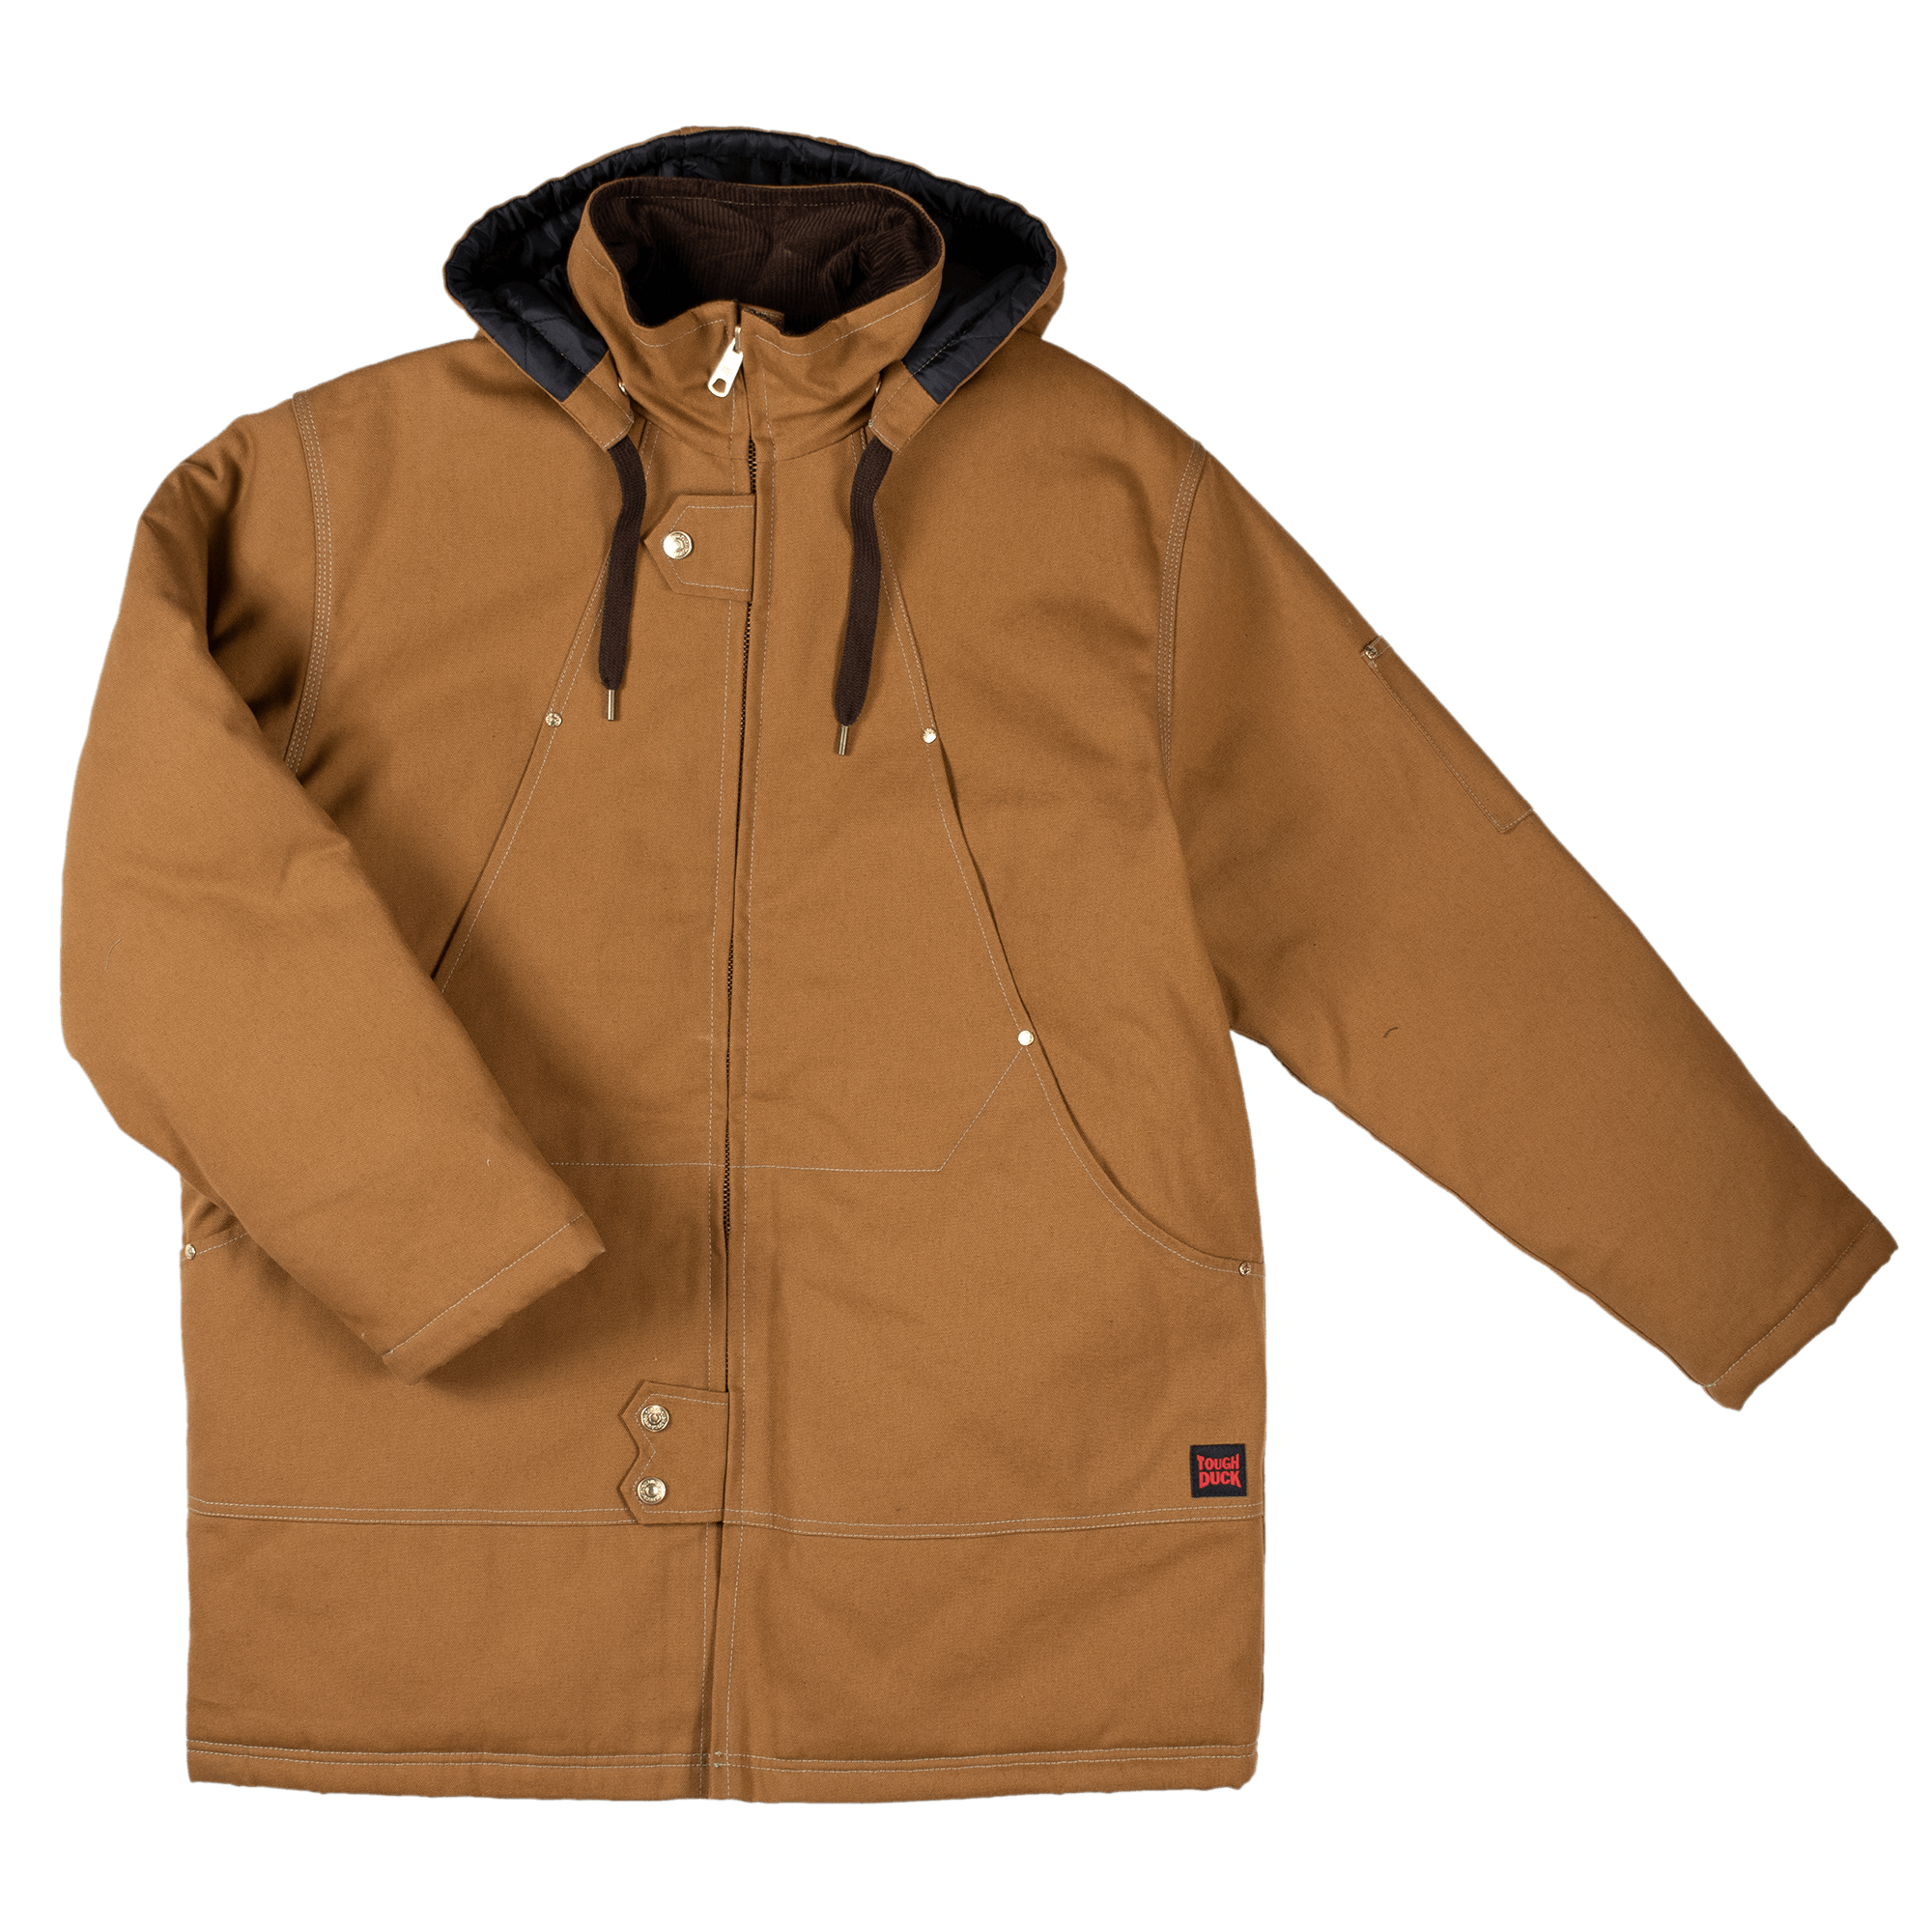 Tough Duck Abraham Hydro Parka - Mucksters Supply Corp